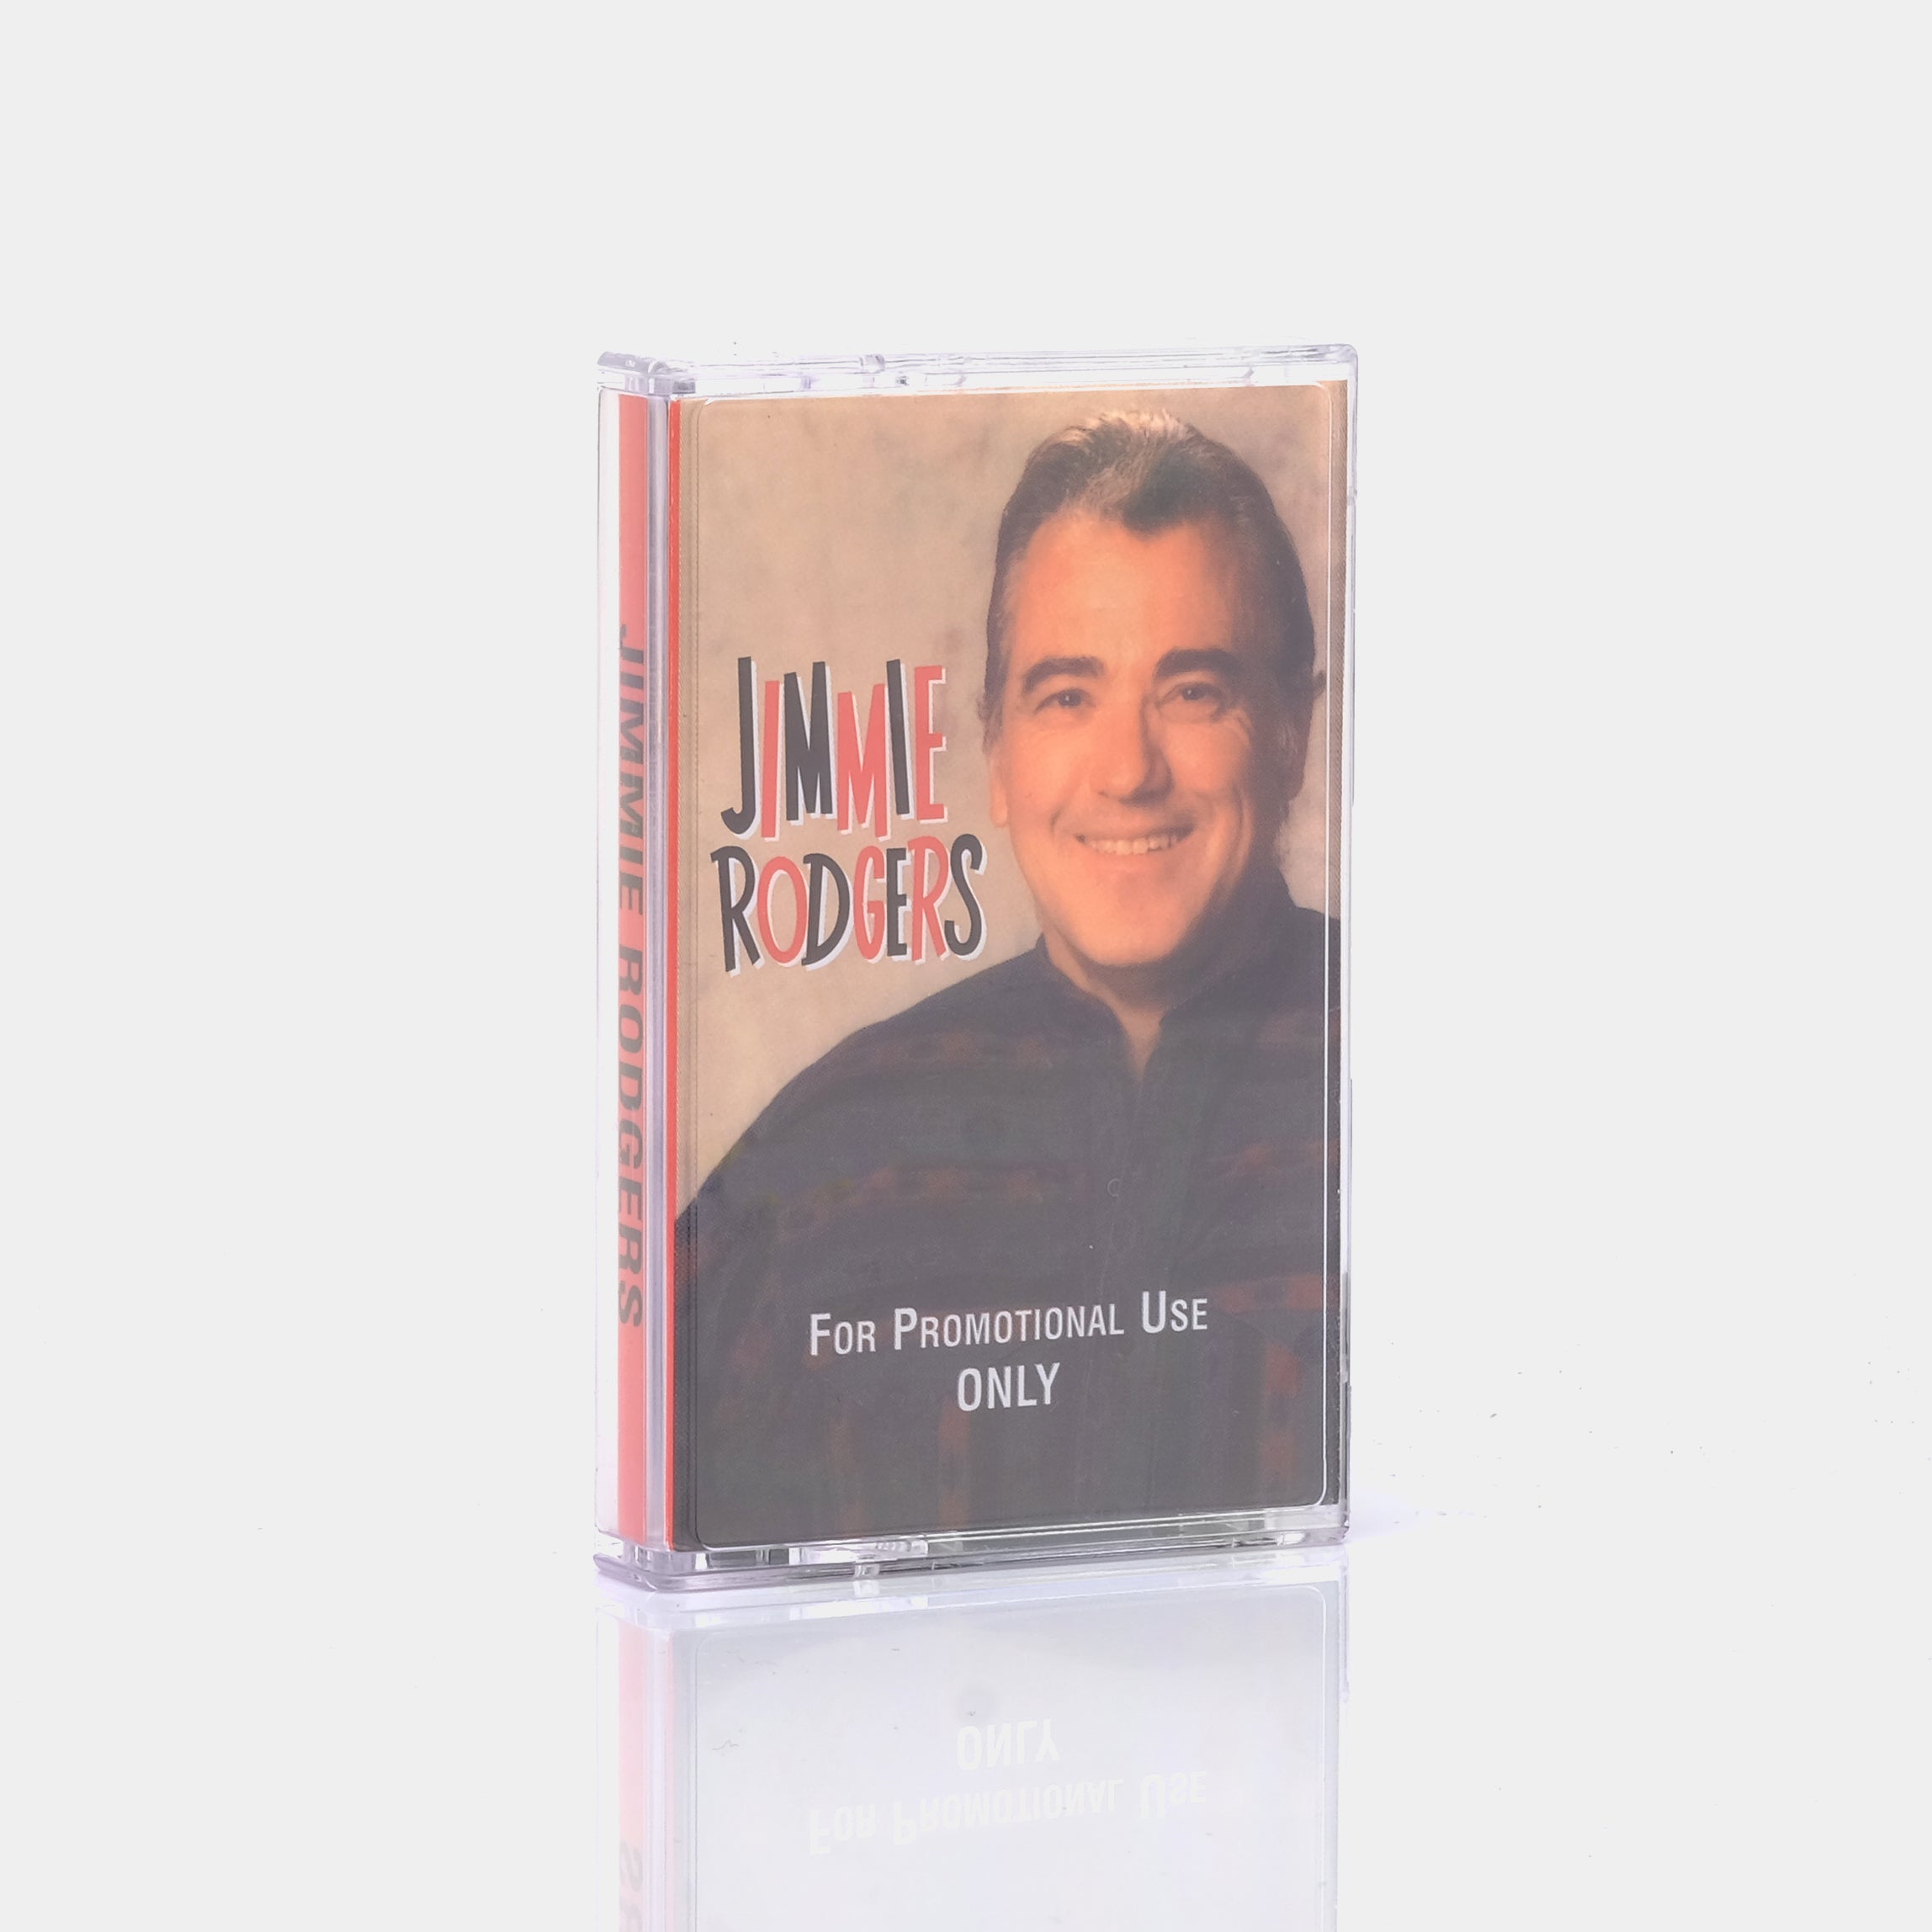 Jimmie Rodgers - Jimmie Rodgers Cassette Tape